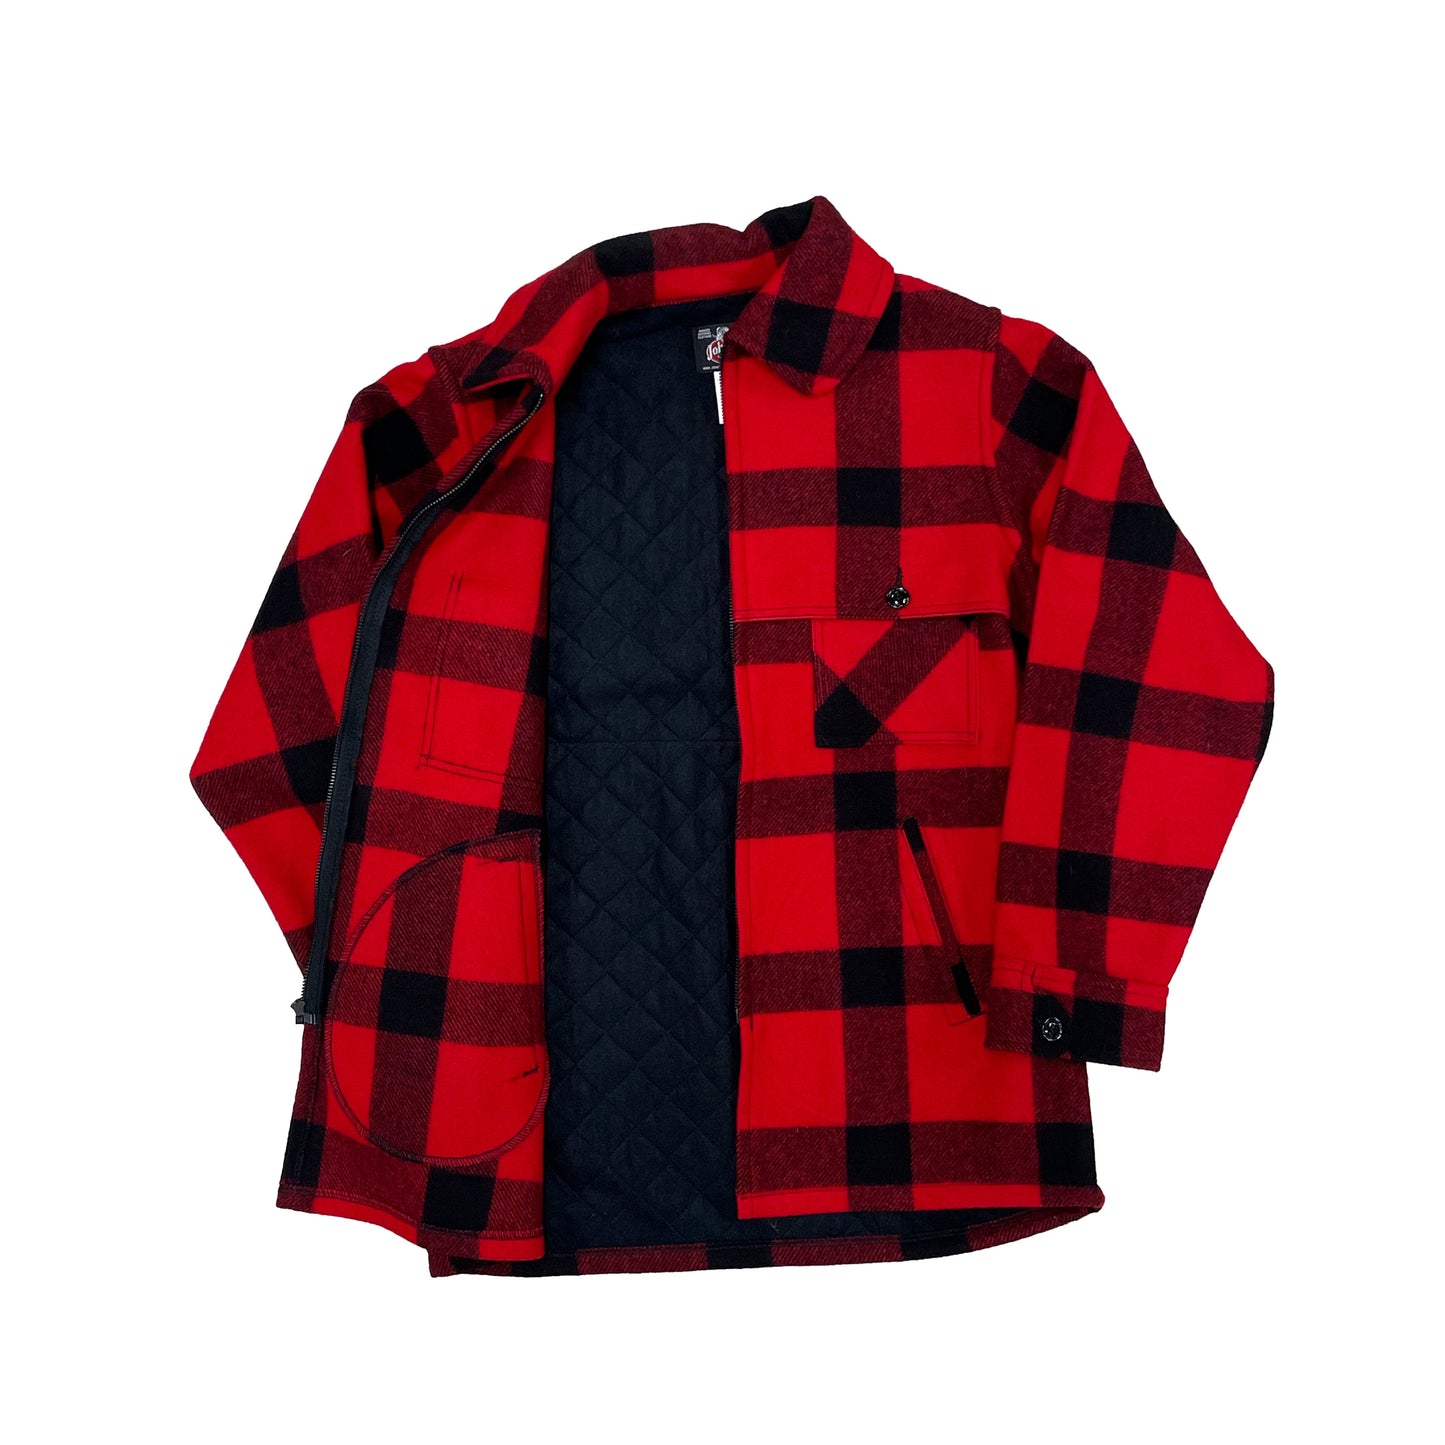 Johnson Woolen Mills Cruiser jacket in Red and black buffalo check interior view